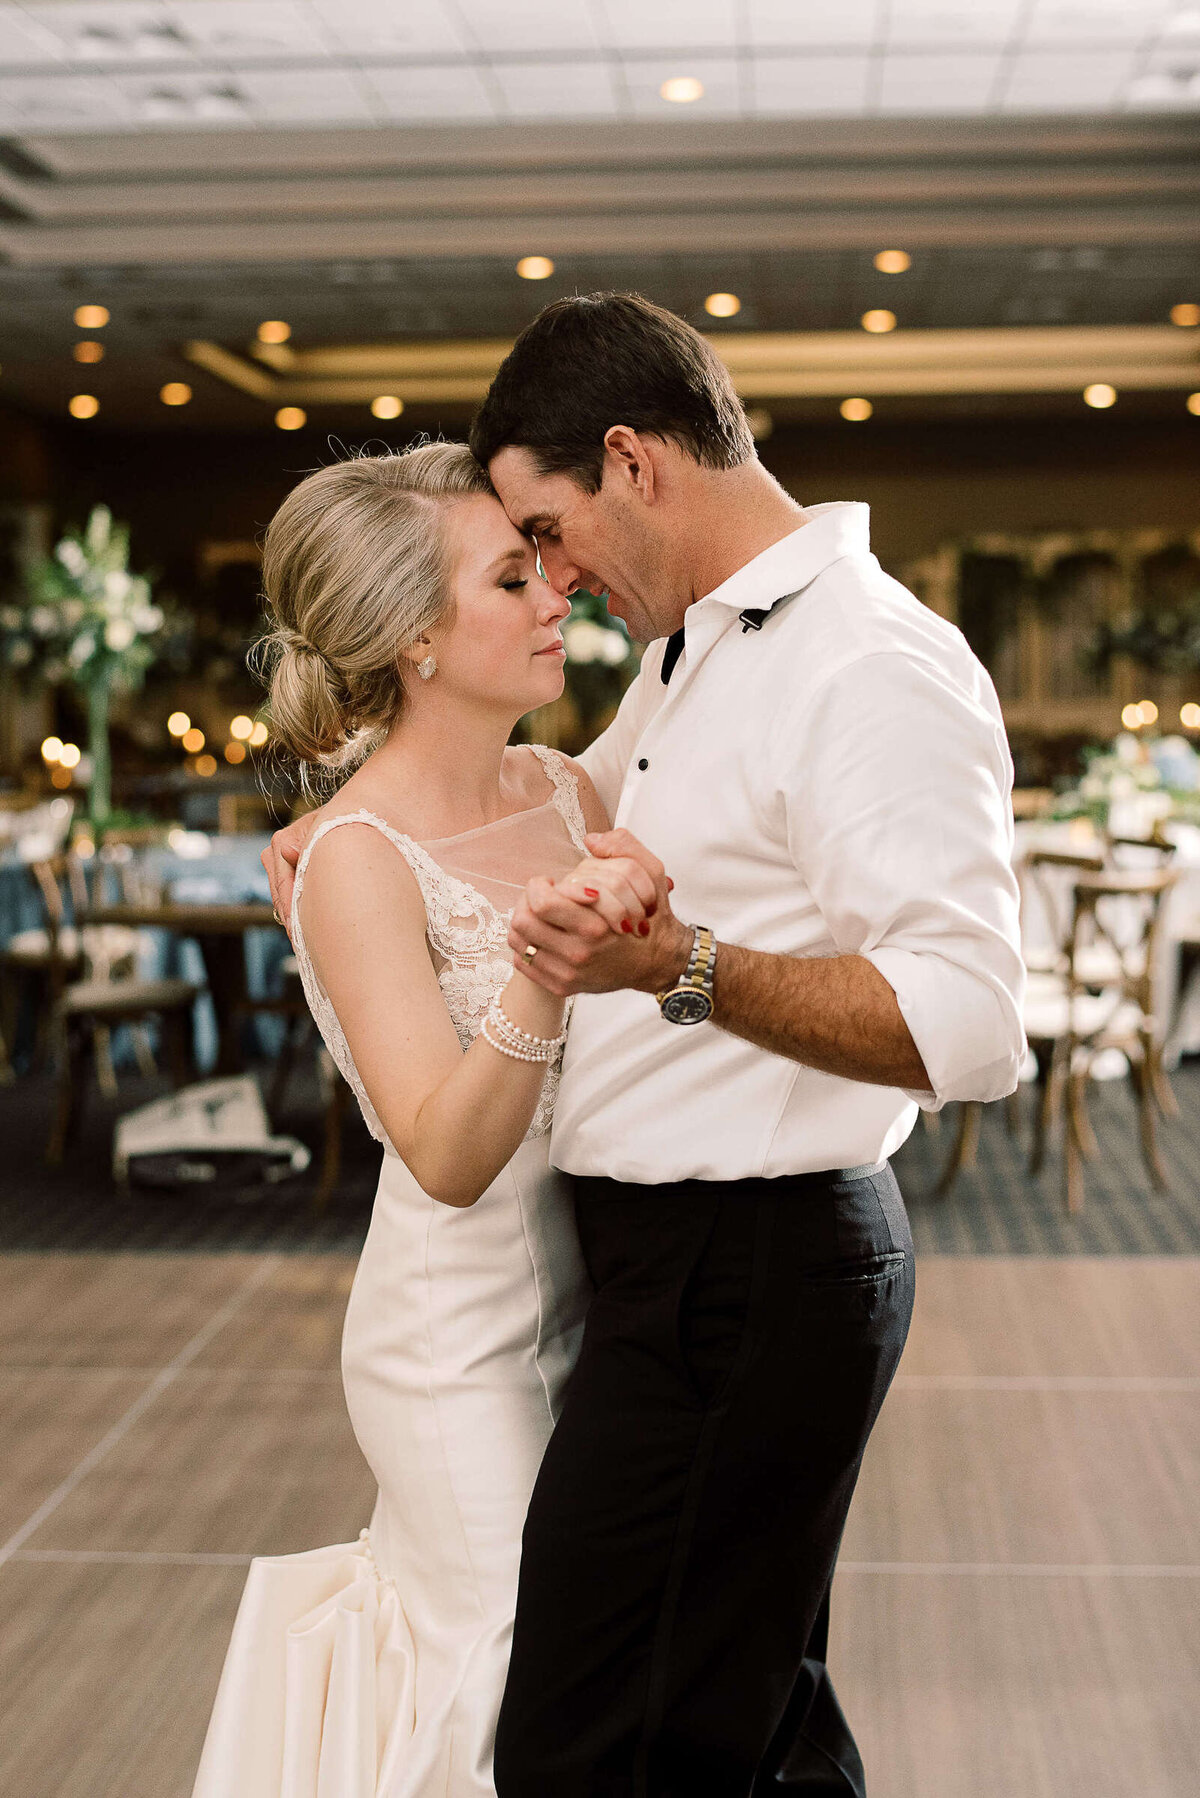 Bride and groom embrace as they slow dance at Texas hill country wedding